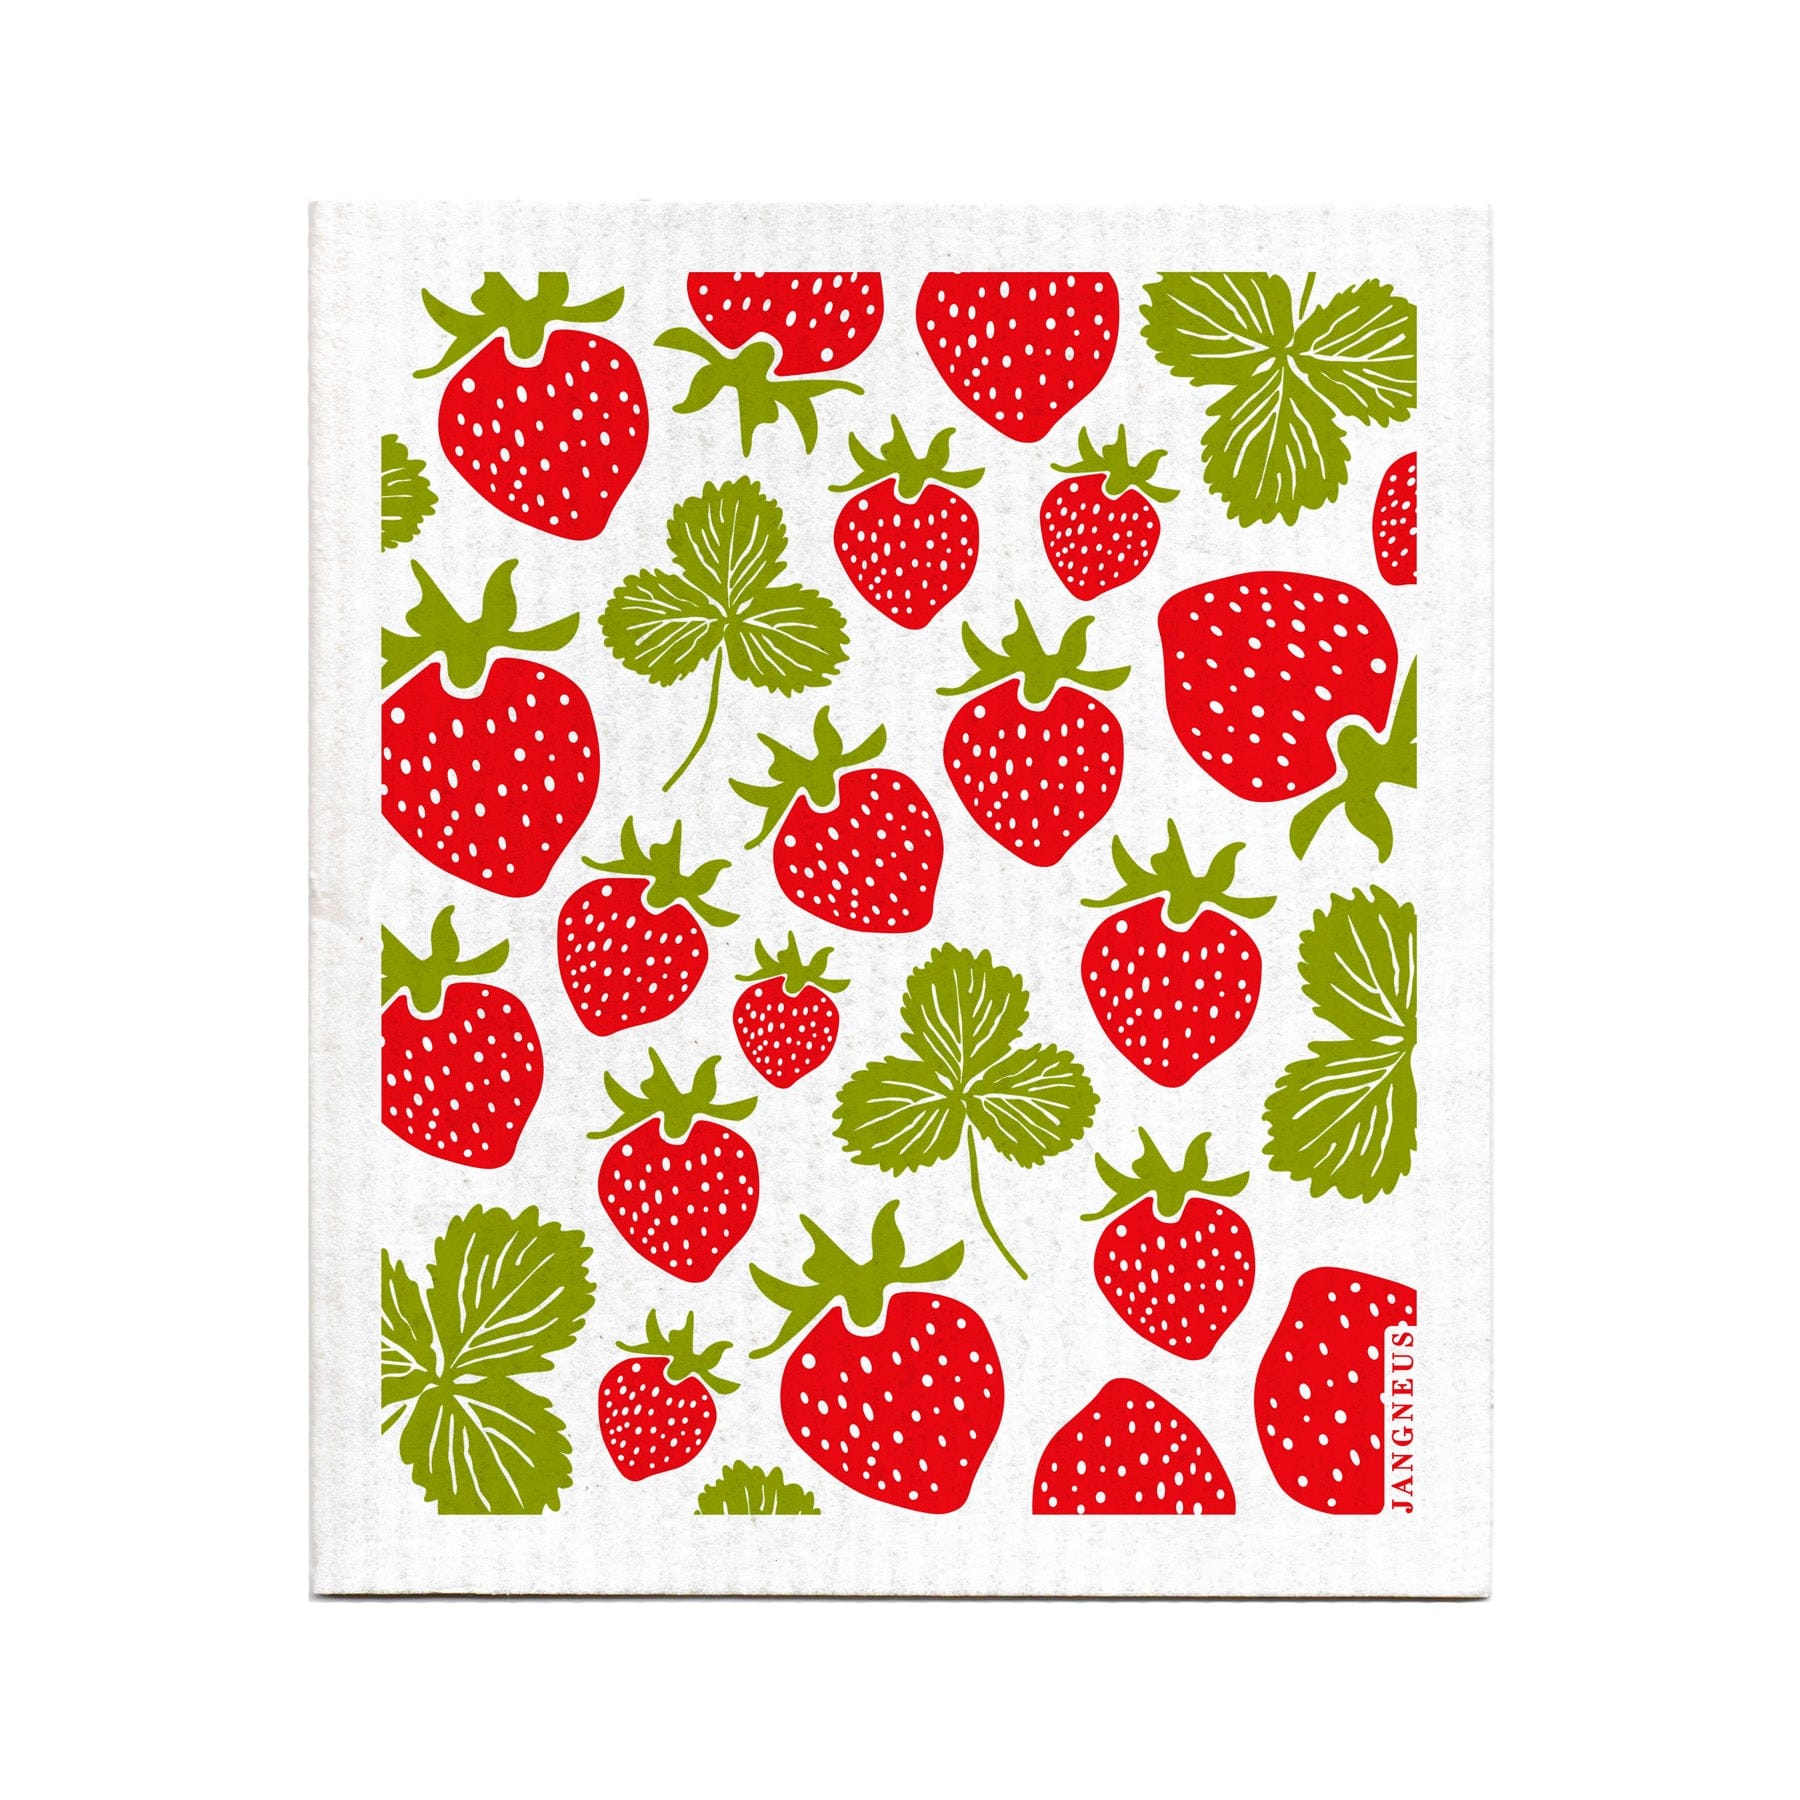 Red and green strawberry pattern on white background, fruit illustration, strawberry print design, fabric texture with berry motif